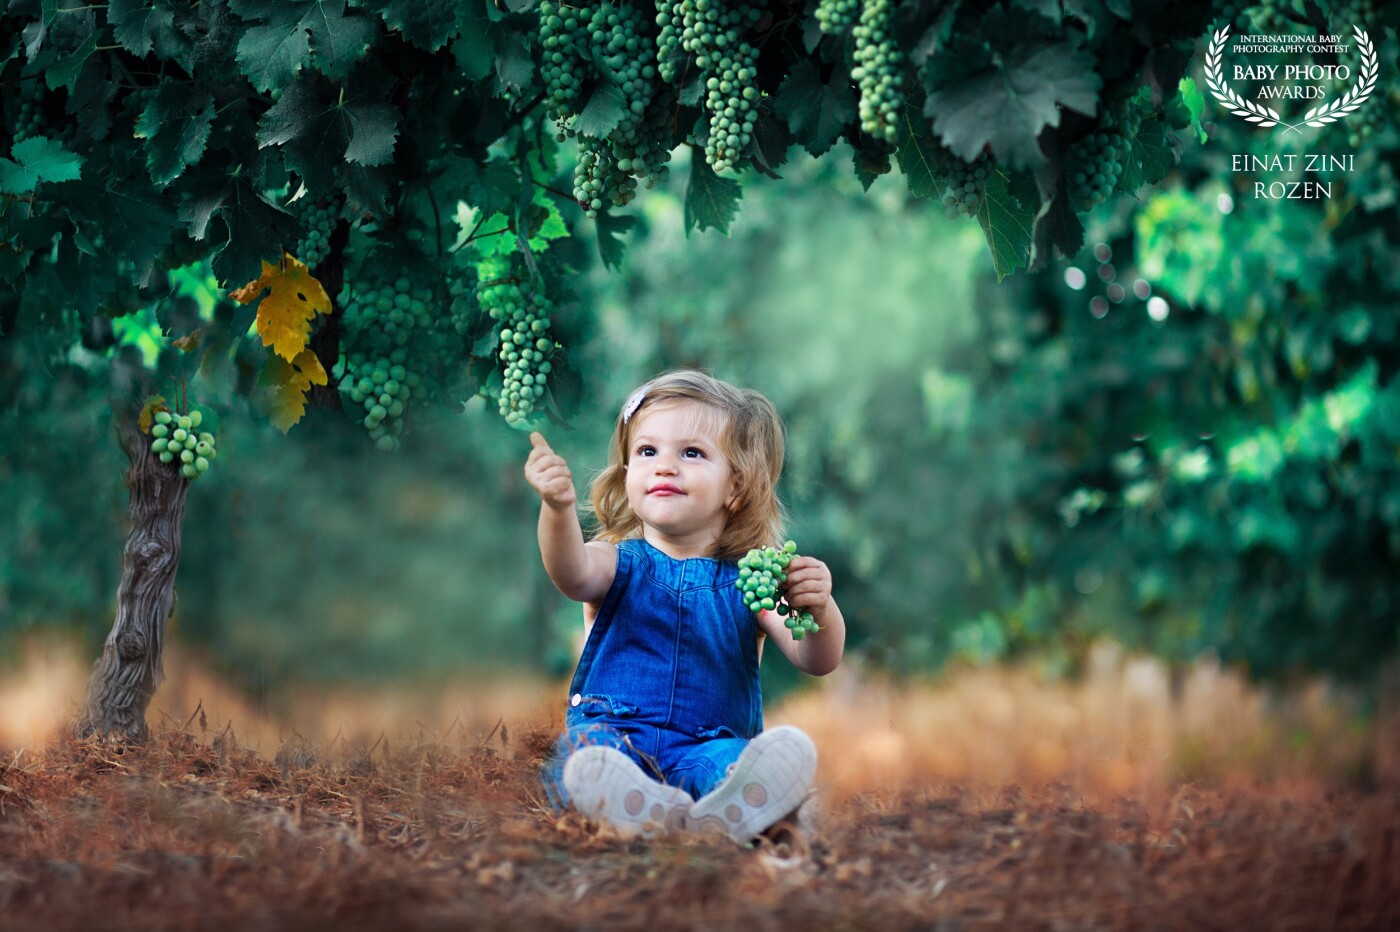 magic in the vineyard happens when we let SHIRA (the girl in the photo) to connect to nature and feel the sense of grapes up close. <br />
for me this photo represent the amazing and initial connection between kids to authentic nature.